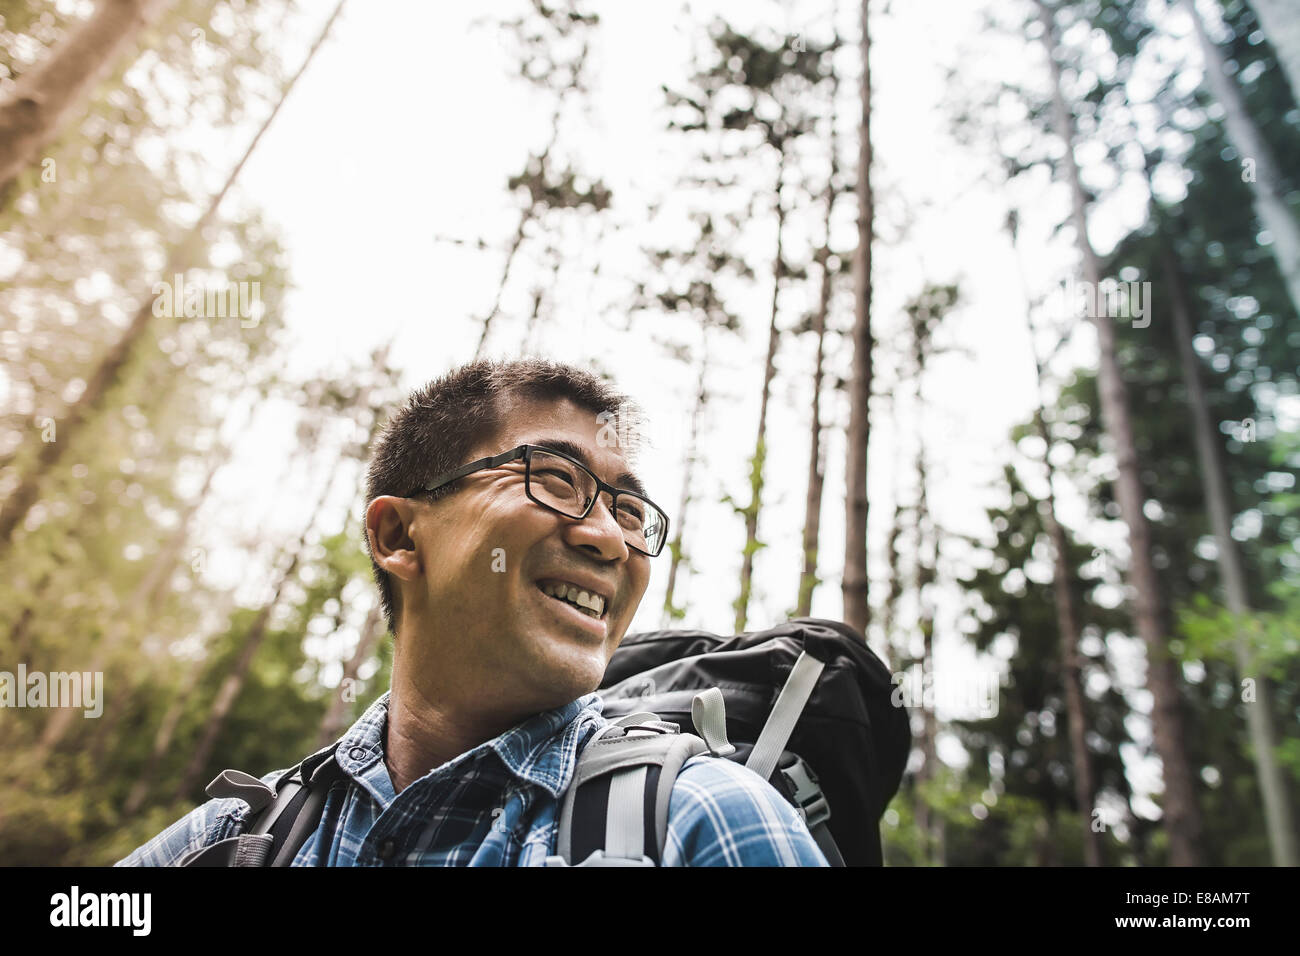 Hiker in forest wearing glasses, smiling Stock Photo